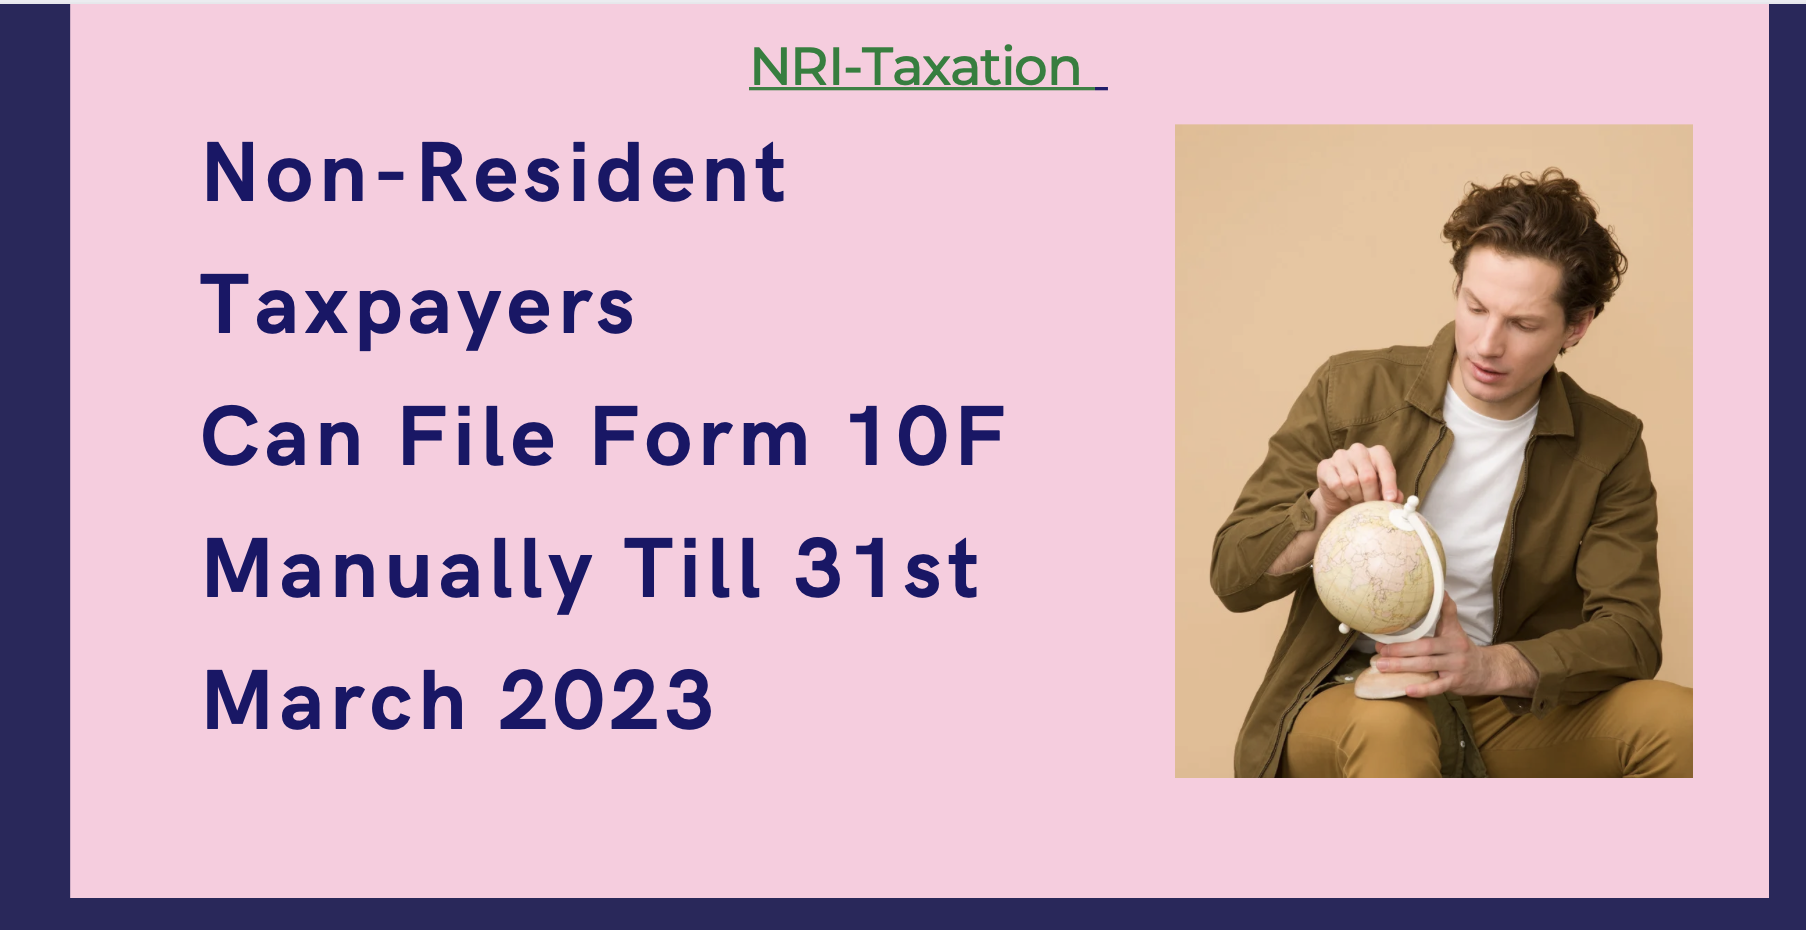 nri-taxation-non-resident-taxpayers-can-file-form-10f-manually-till